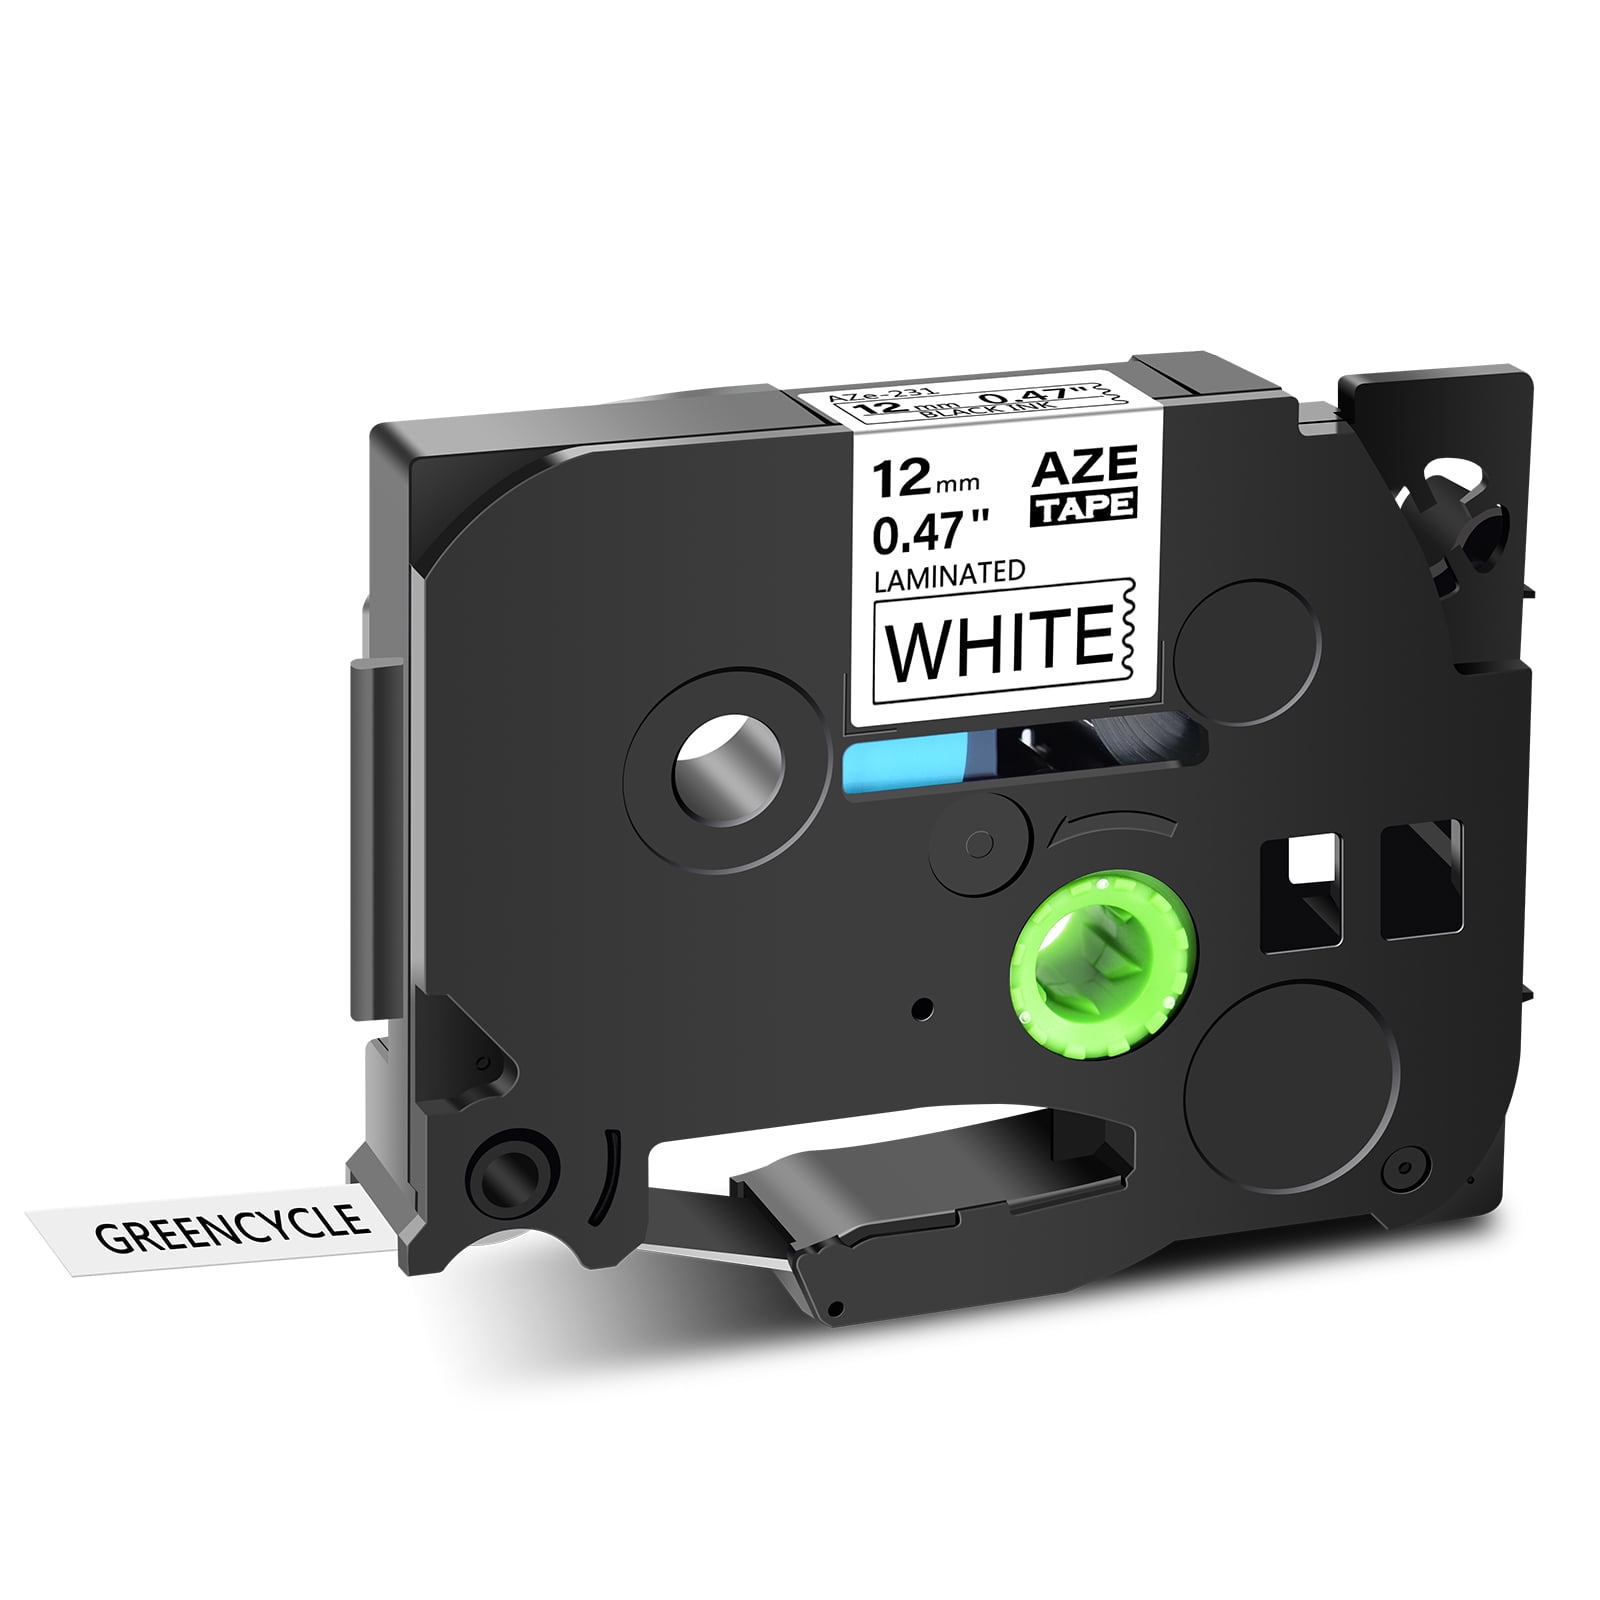 3PK TZ231 TZe231 Black on White Label Tape for Brother P-Touch PT-H110 1/2" 